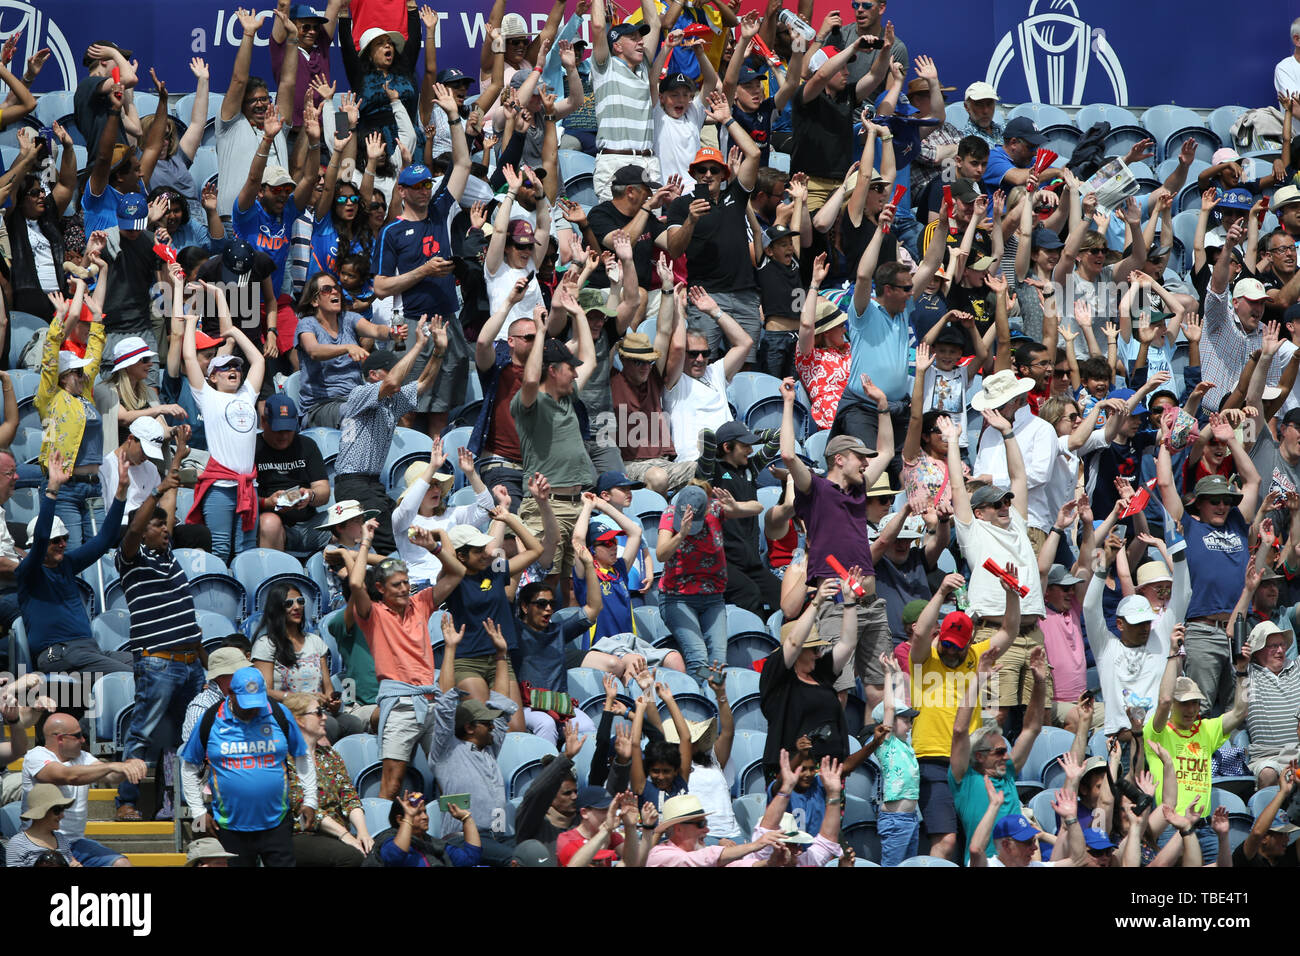 Cardiff, Wales, UK. 1st June 2019, Sophia Gardens Cardiff, cardiff, Wales ; ICC World Cup Cricket test match, New Zealand versus Sri Lanka; Fans perform a Mexican wave during a drinks break Stock Photo